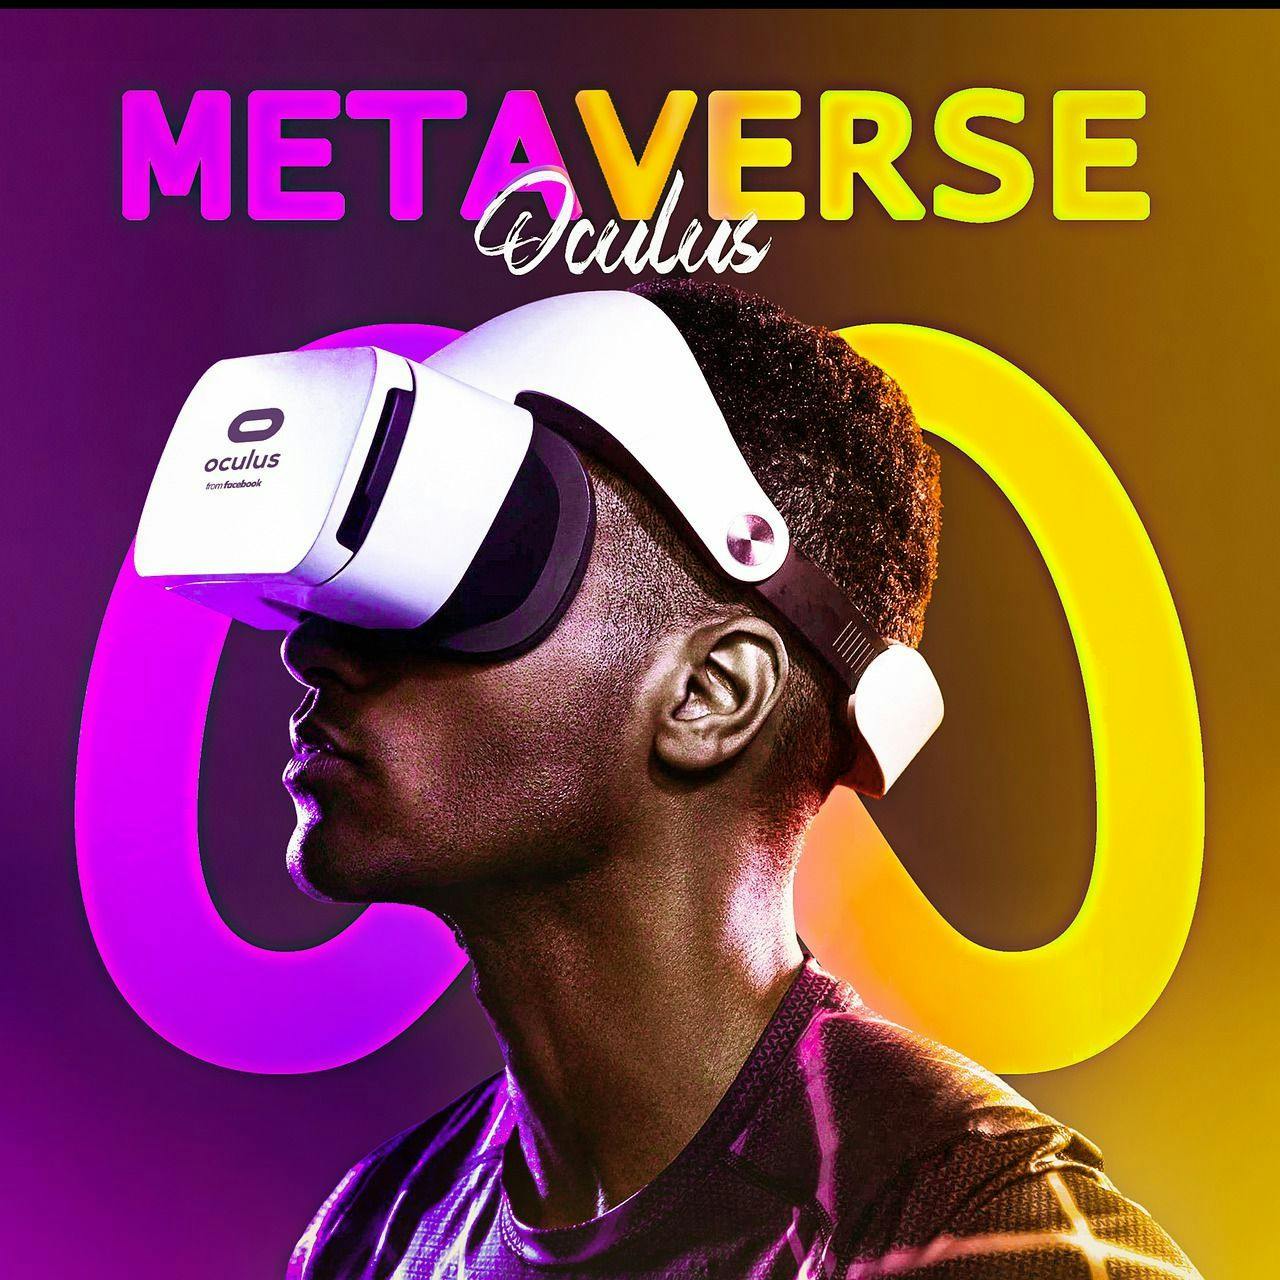 featured image - Let's Take a Look at Gaming in the Metaverse